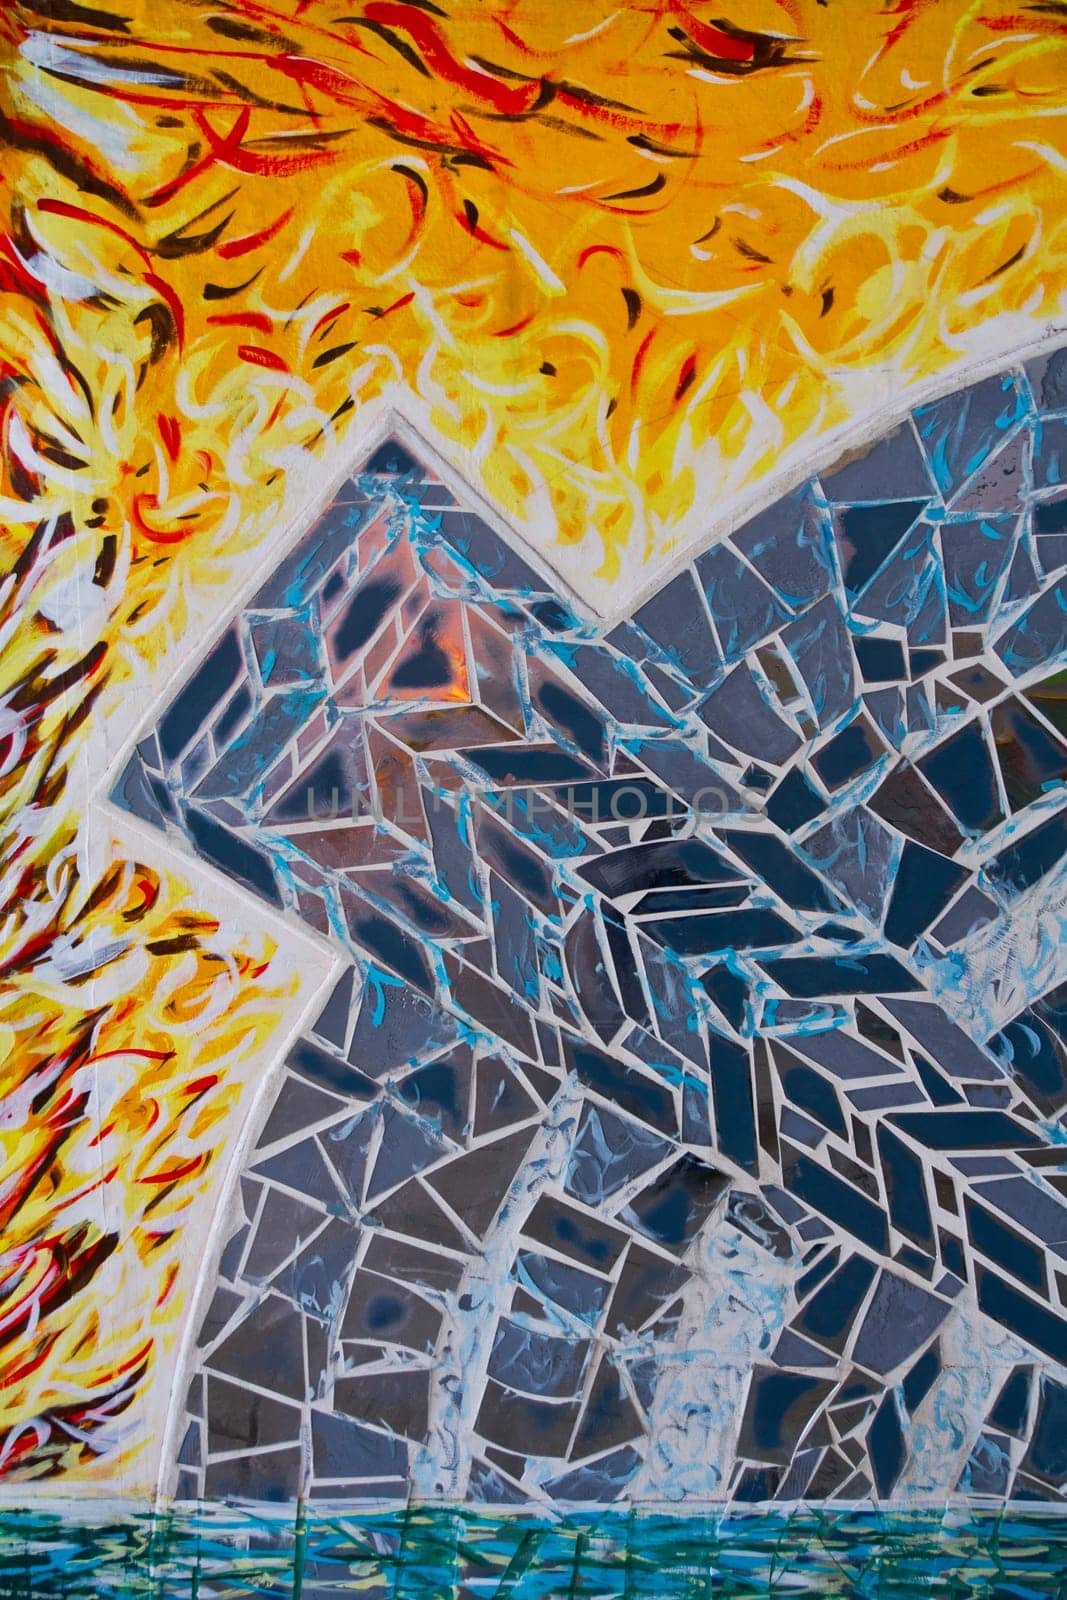 Captivating abstract painting showcasing the fiery energy of flames, the icy sharpness of shattered glass, and the serene flow of rippling water. A vibrant addition to any artistic collection.